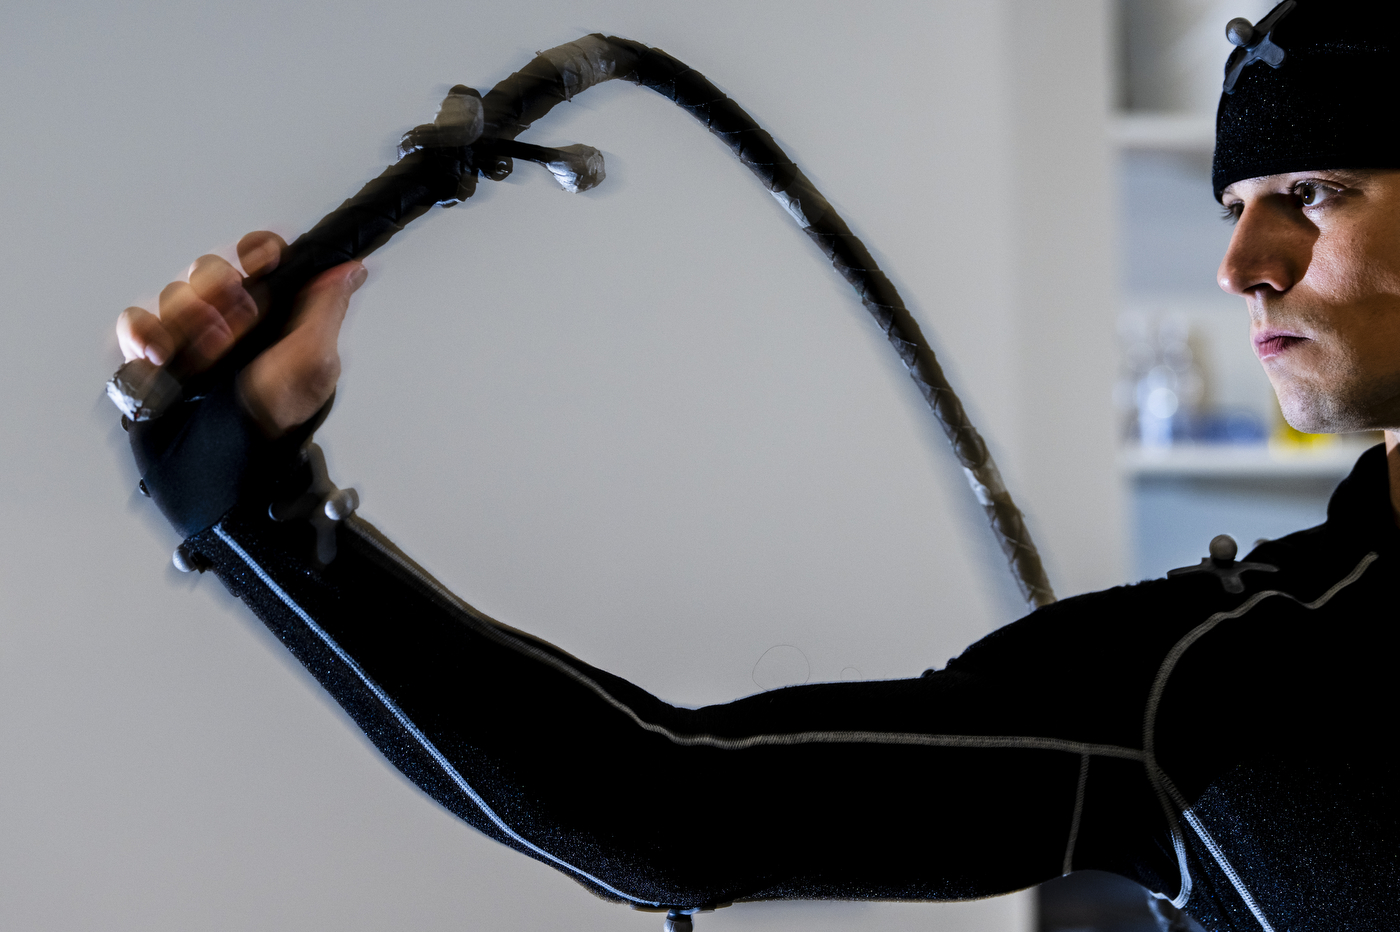 A person preforms human motor control with a whip.